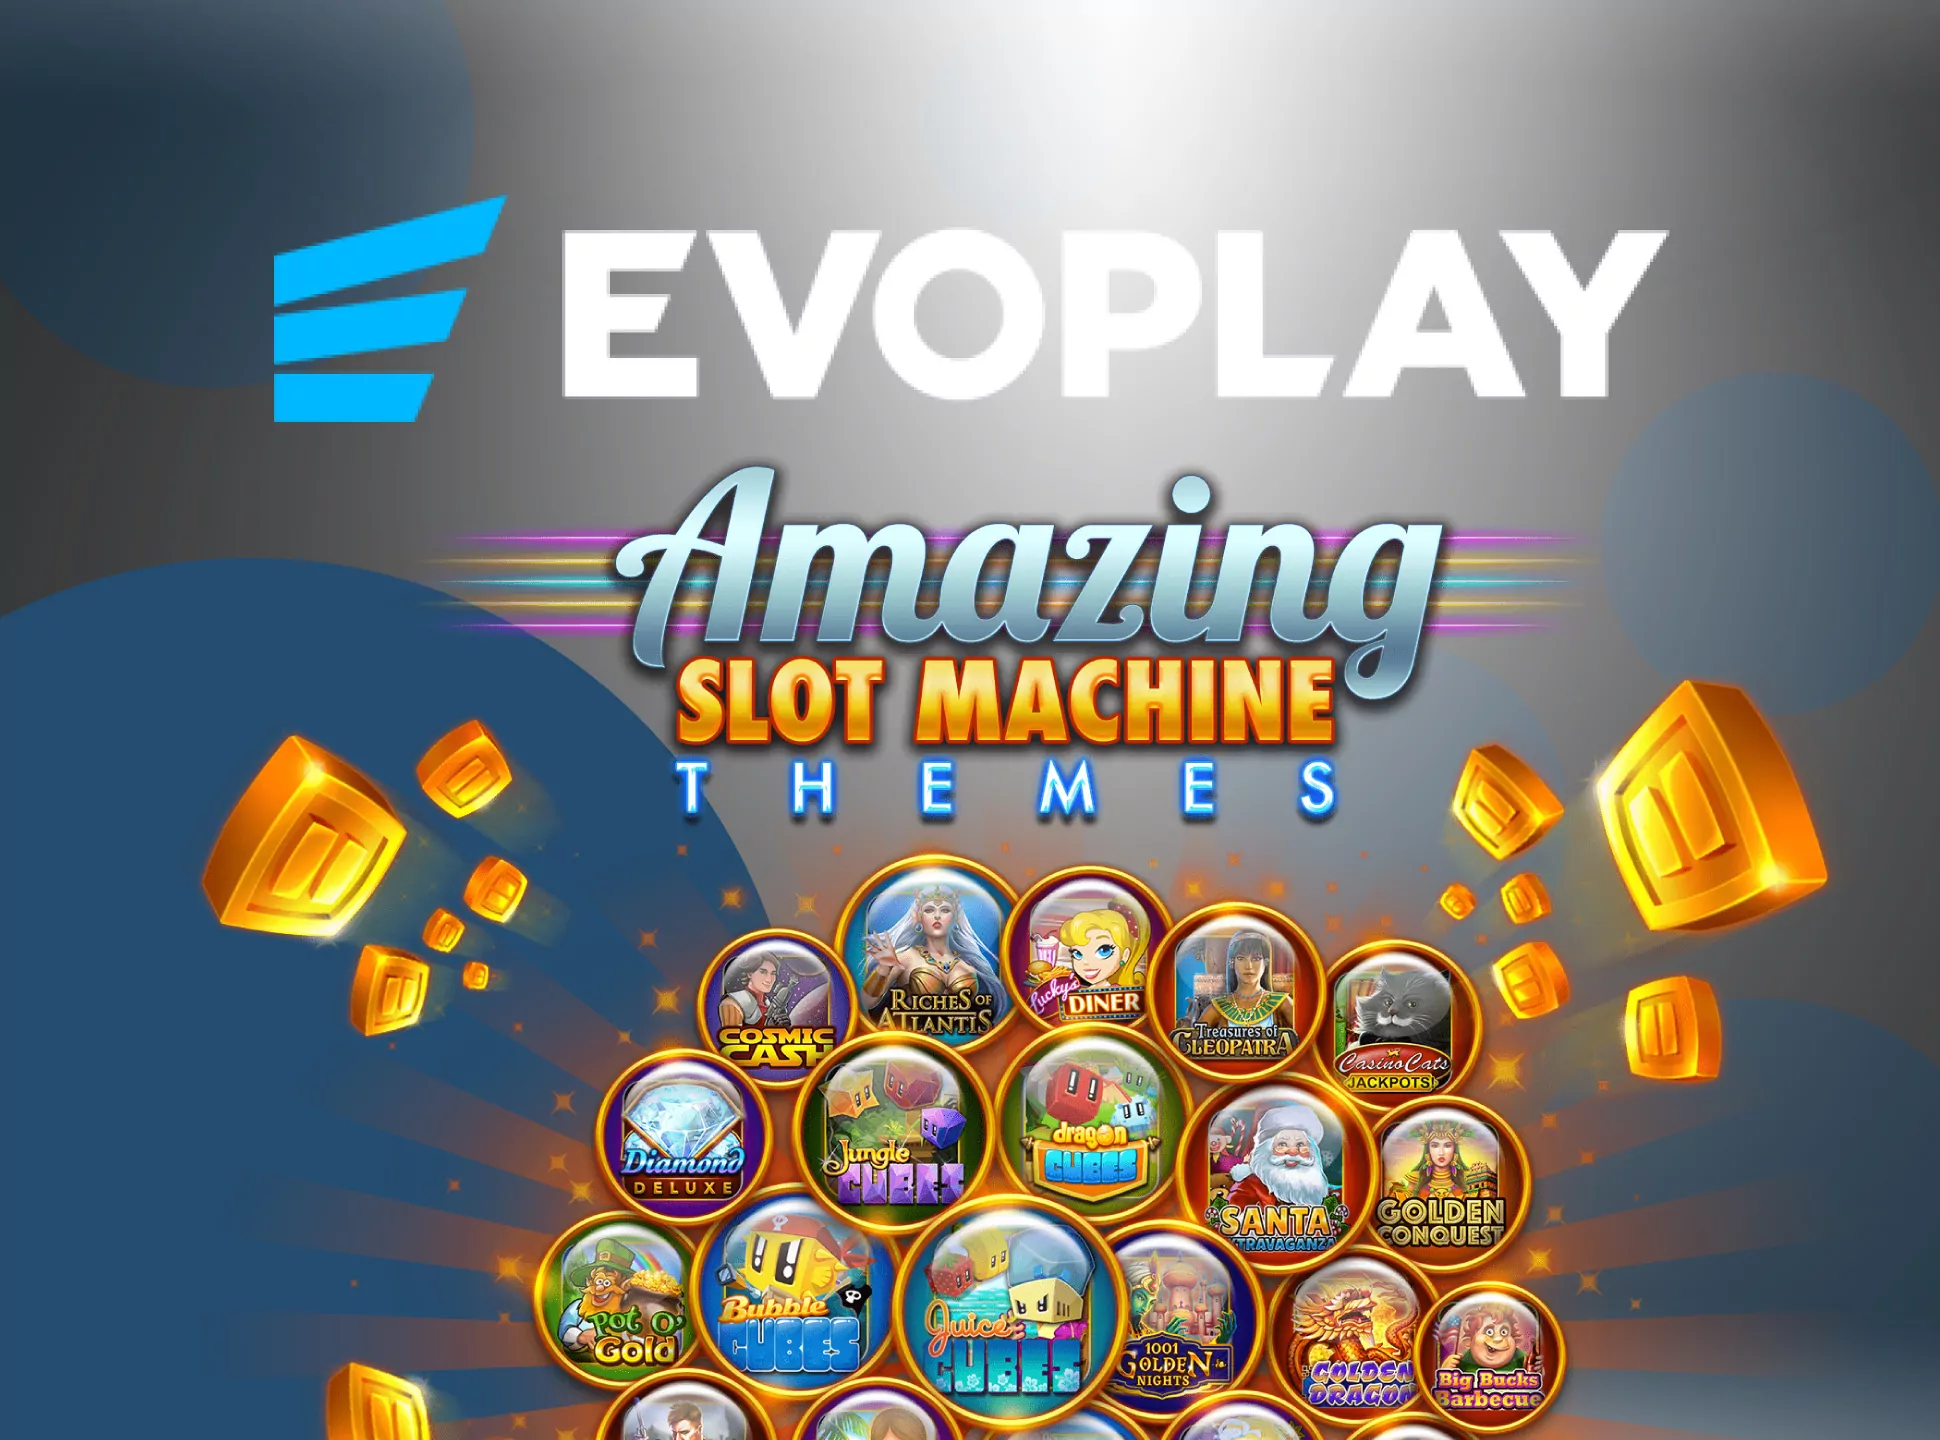 Evoplay games are also can be found in the Mostbet app.